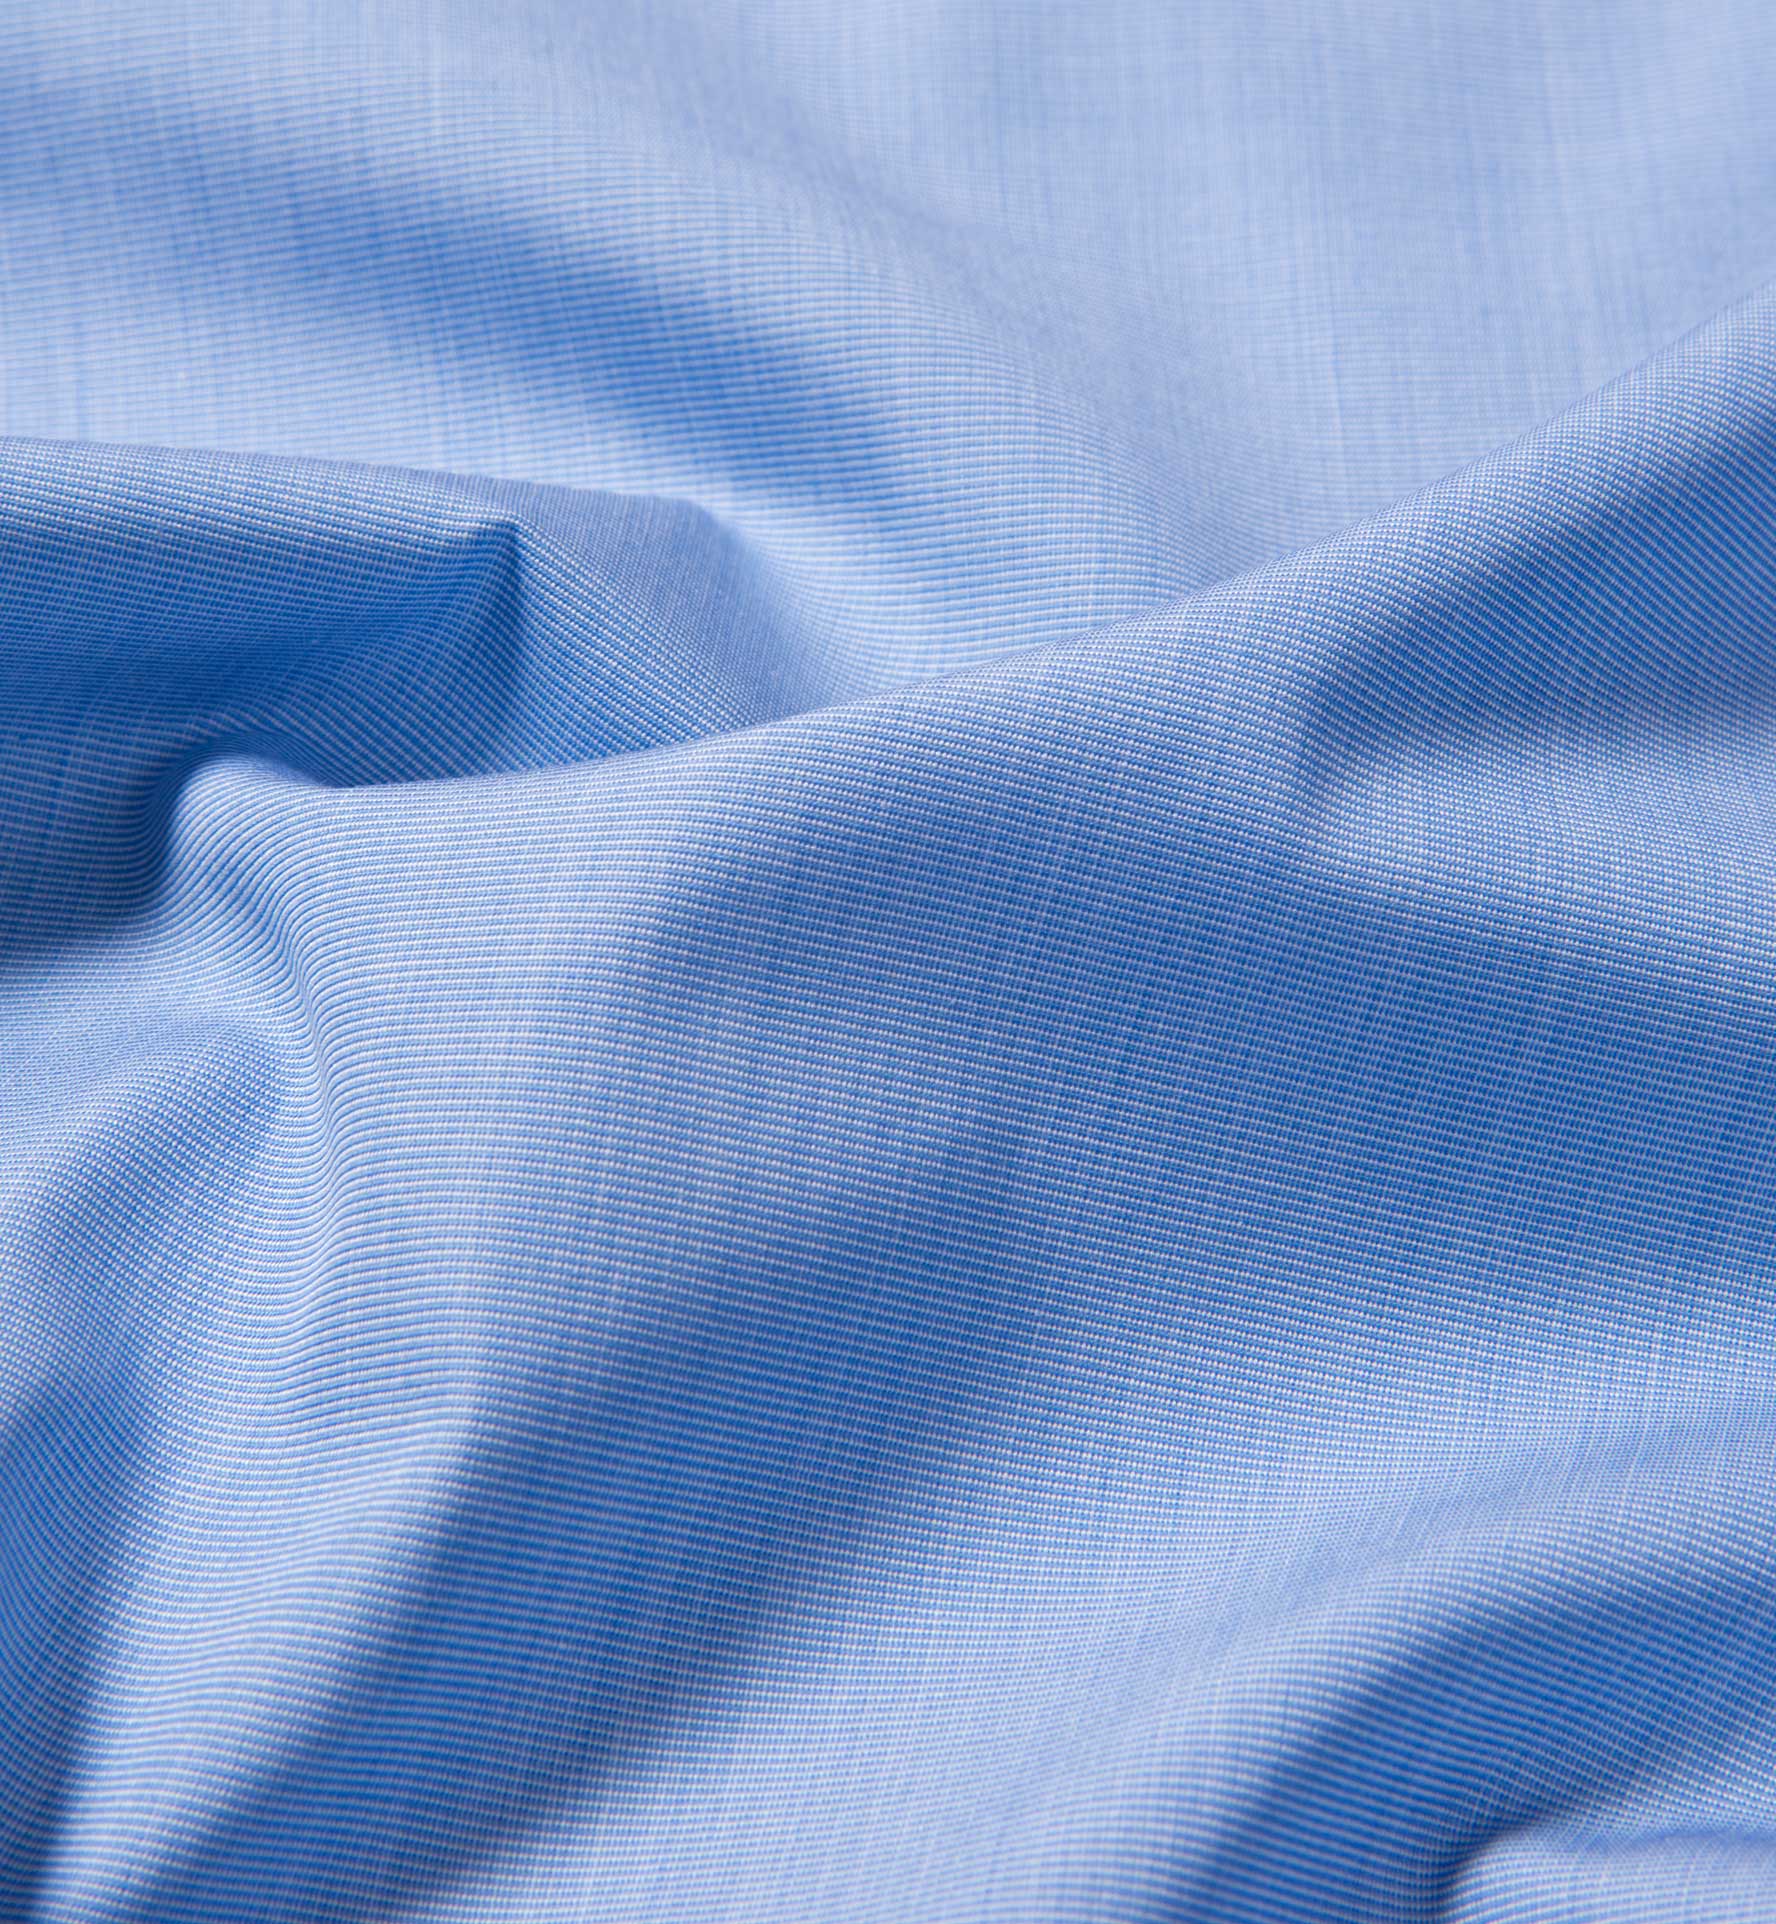 Stanton 120s Blue End-on-End Shirts by Proper Cloth